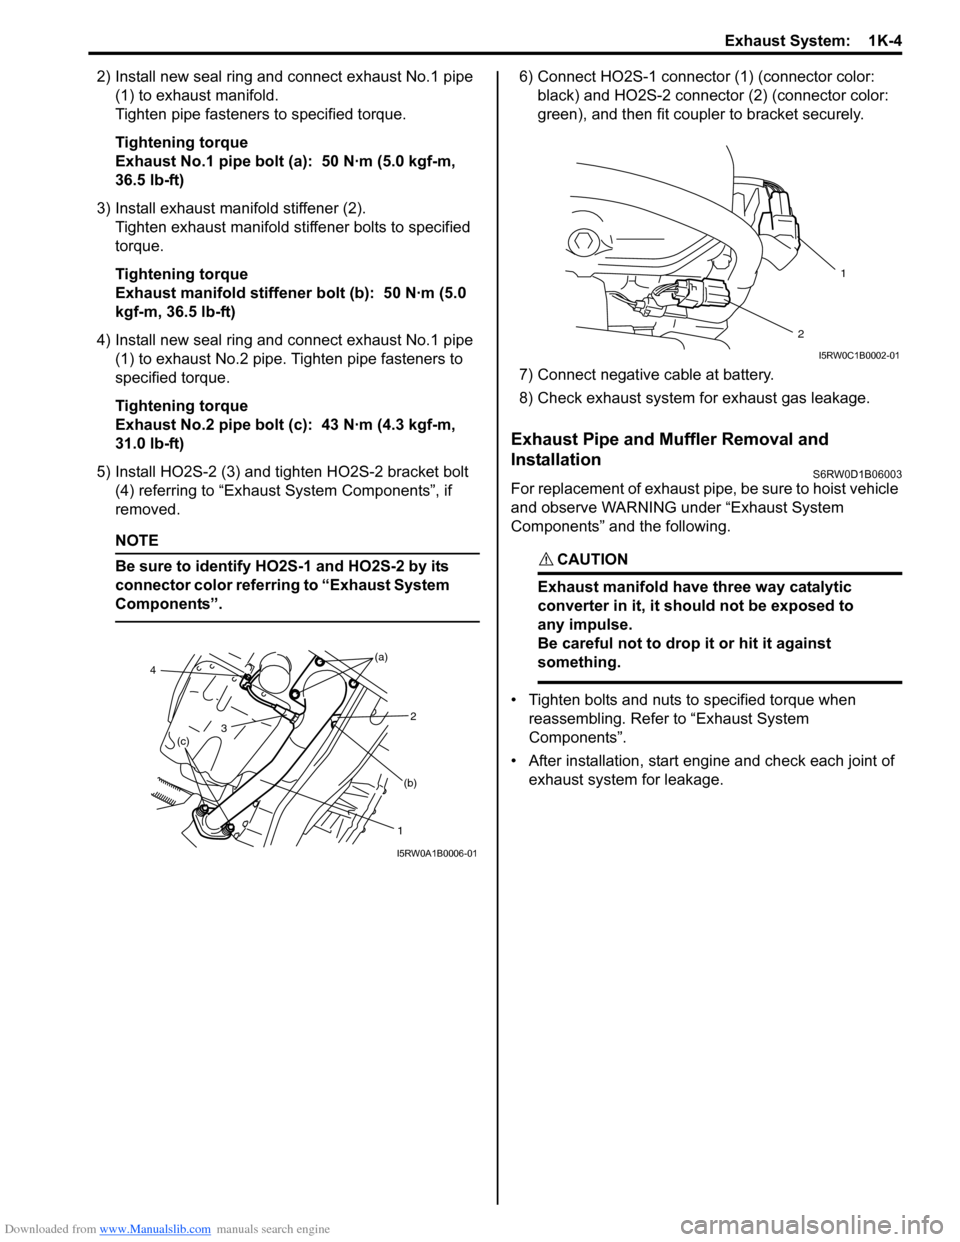 SUZUKI SX4 2006 1.G Service Workshop Manual Downloaded from www.Manualslib.com manuals search engine Exhaust System:  1K-4
2) Install new seal ring and connect exhaust No.1 pipe 
(1) to exhaust manifold.
Tighten pipe fasteners to specified torq